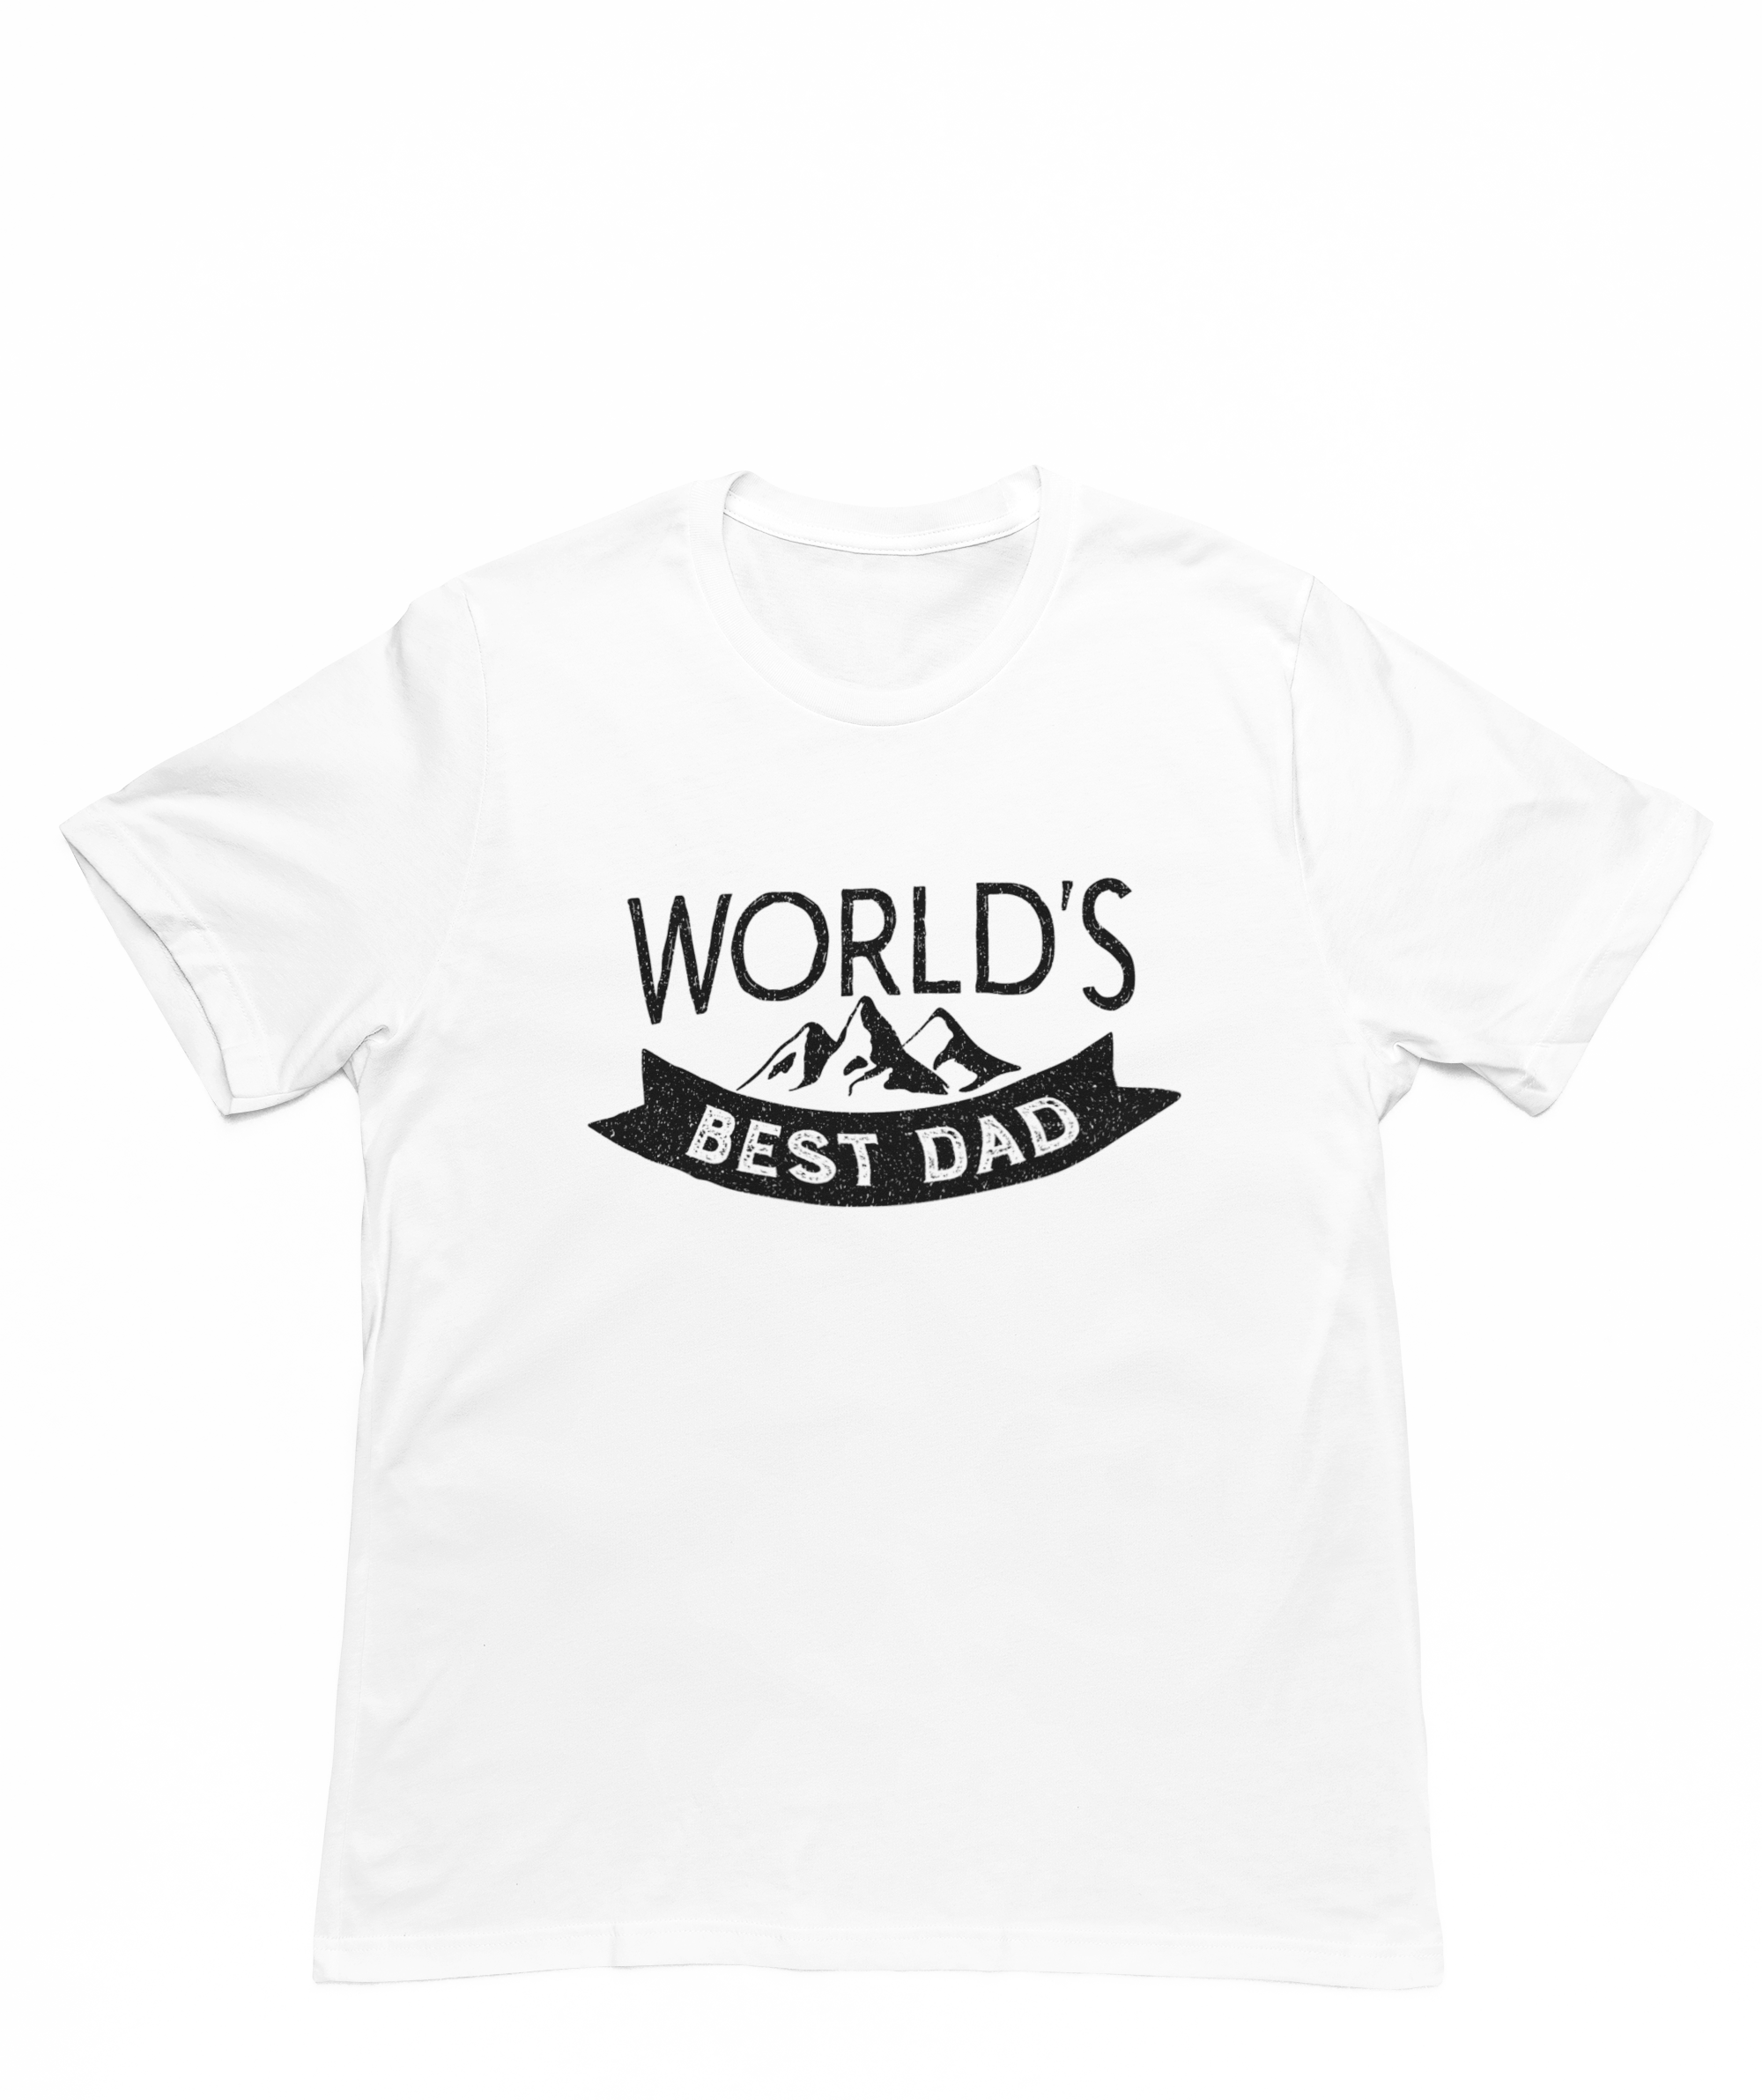 The worlds best dad t-shirt - Father's Day gift